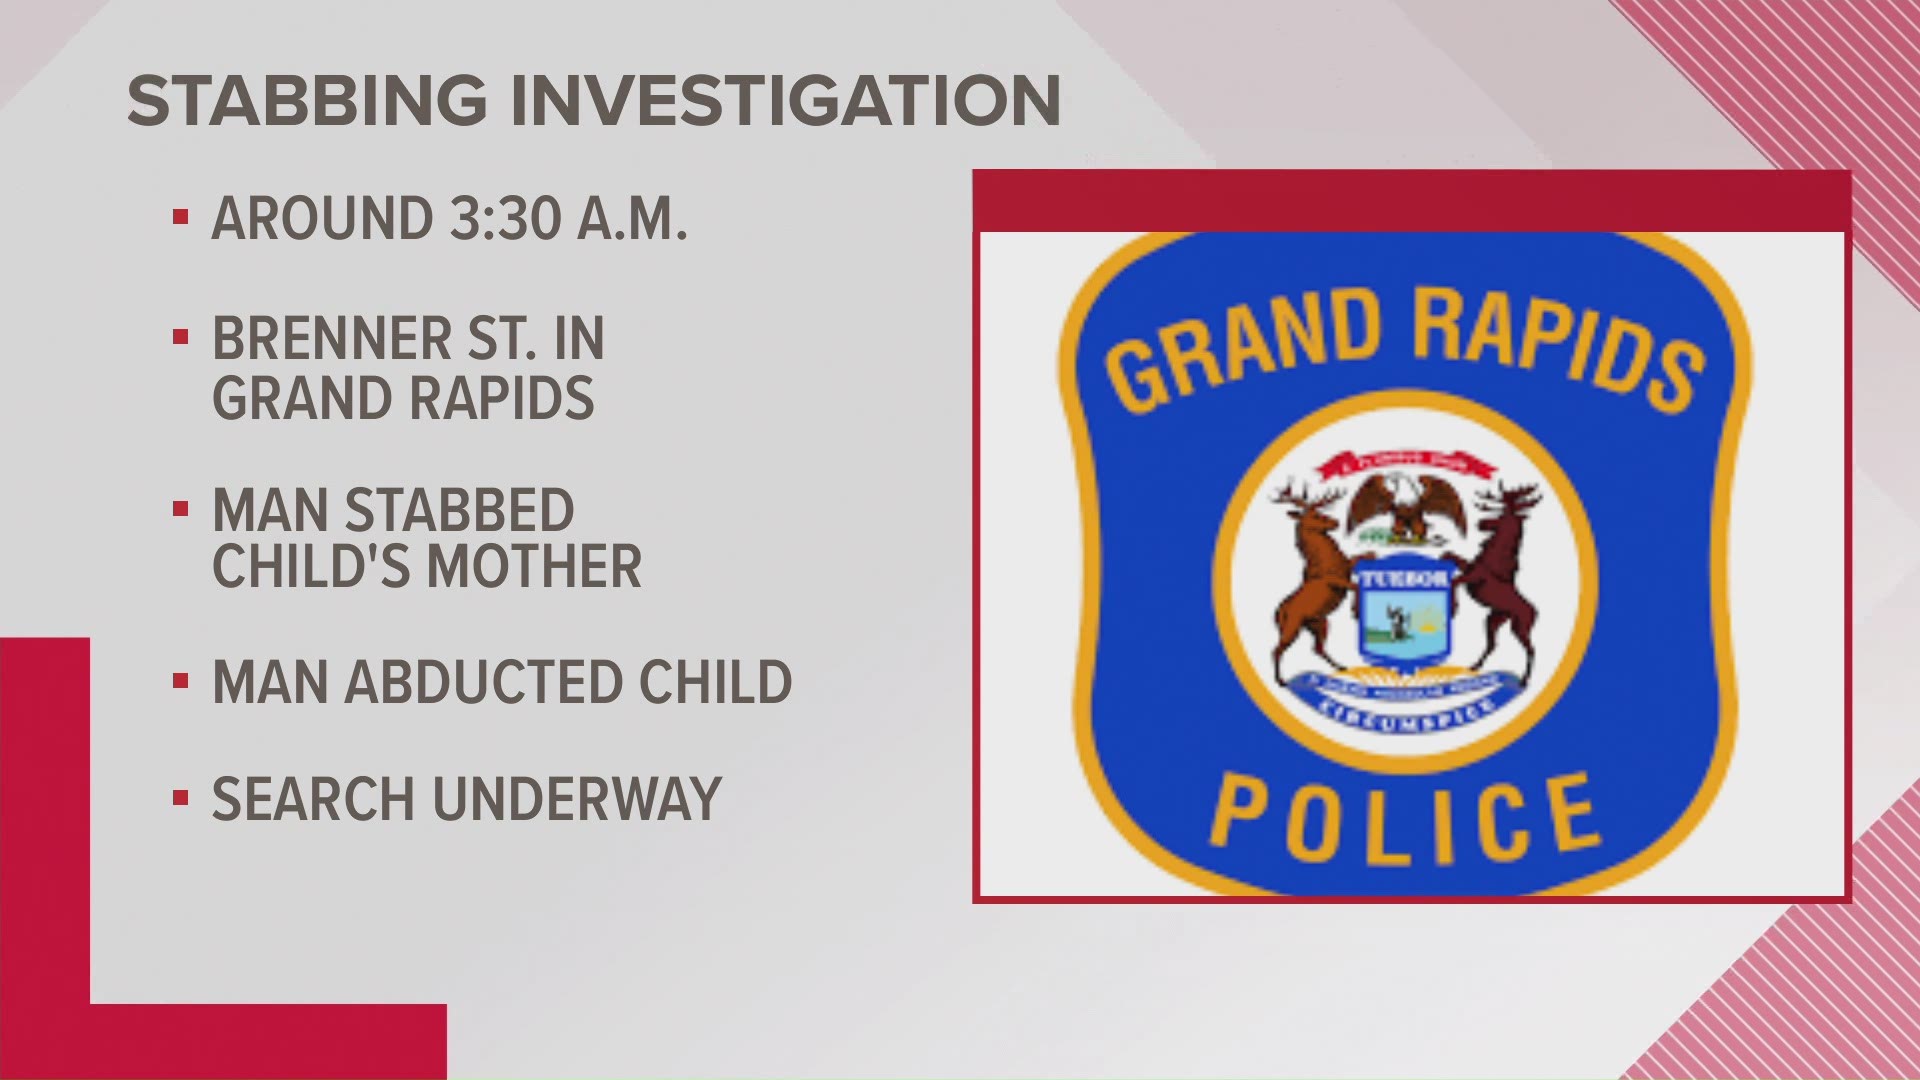 Authorities in Grand Rapids are searching for a stabbing suspect who took a 6-month-old child early Thursday morning.